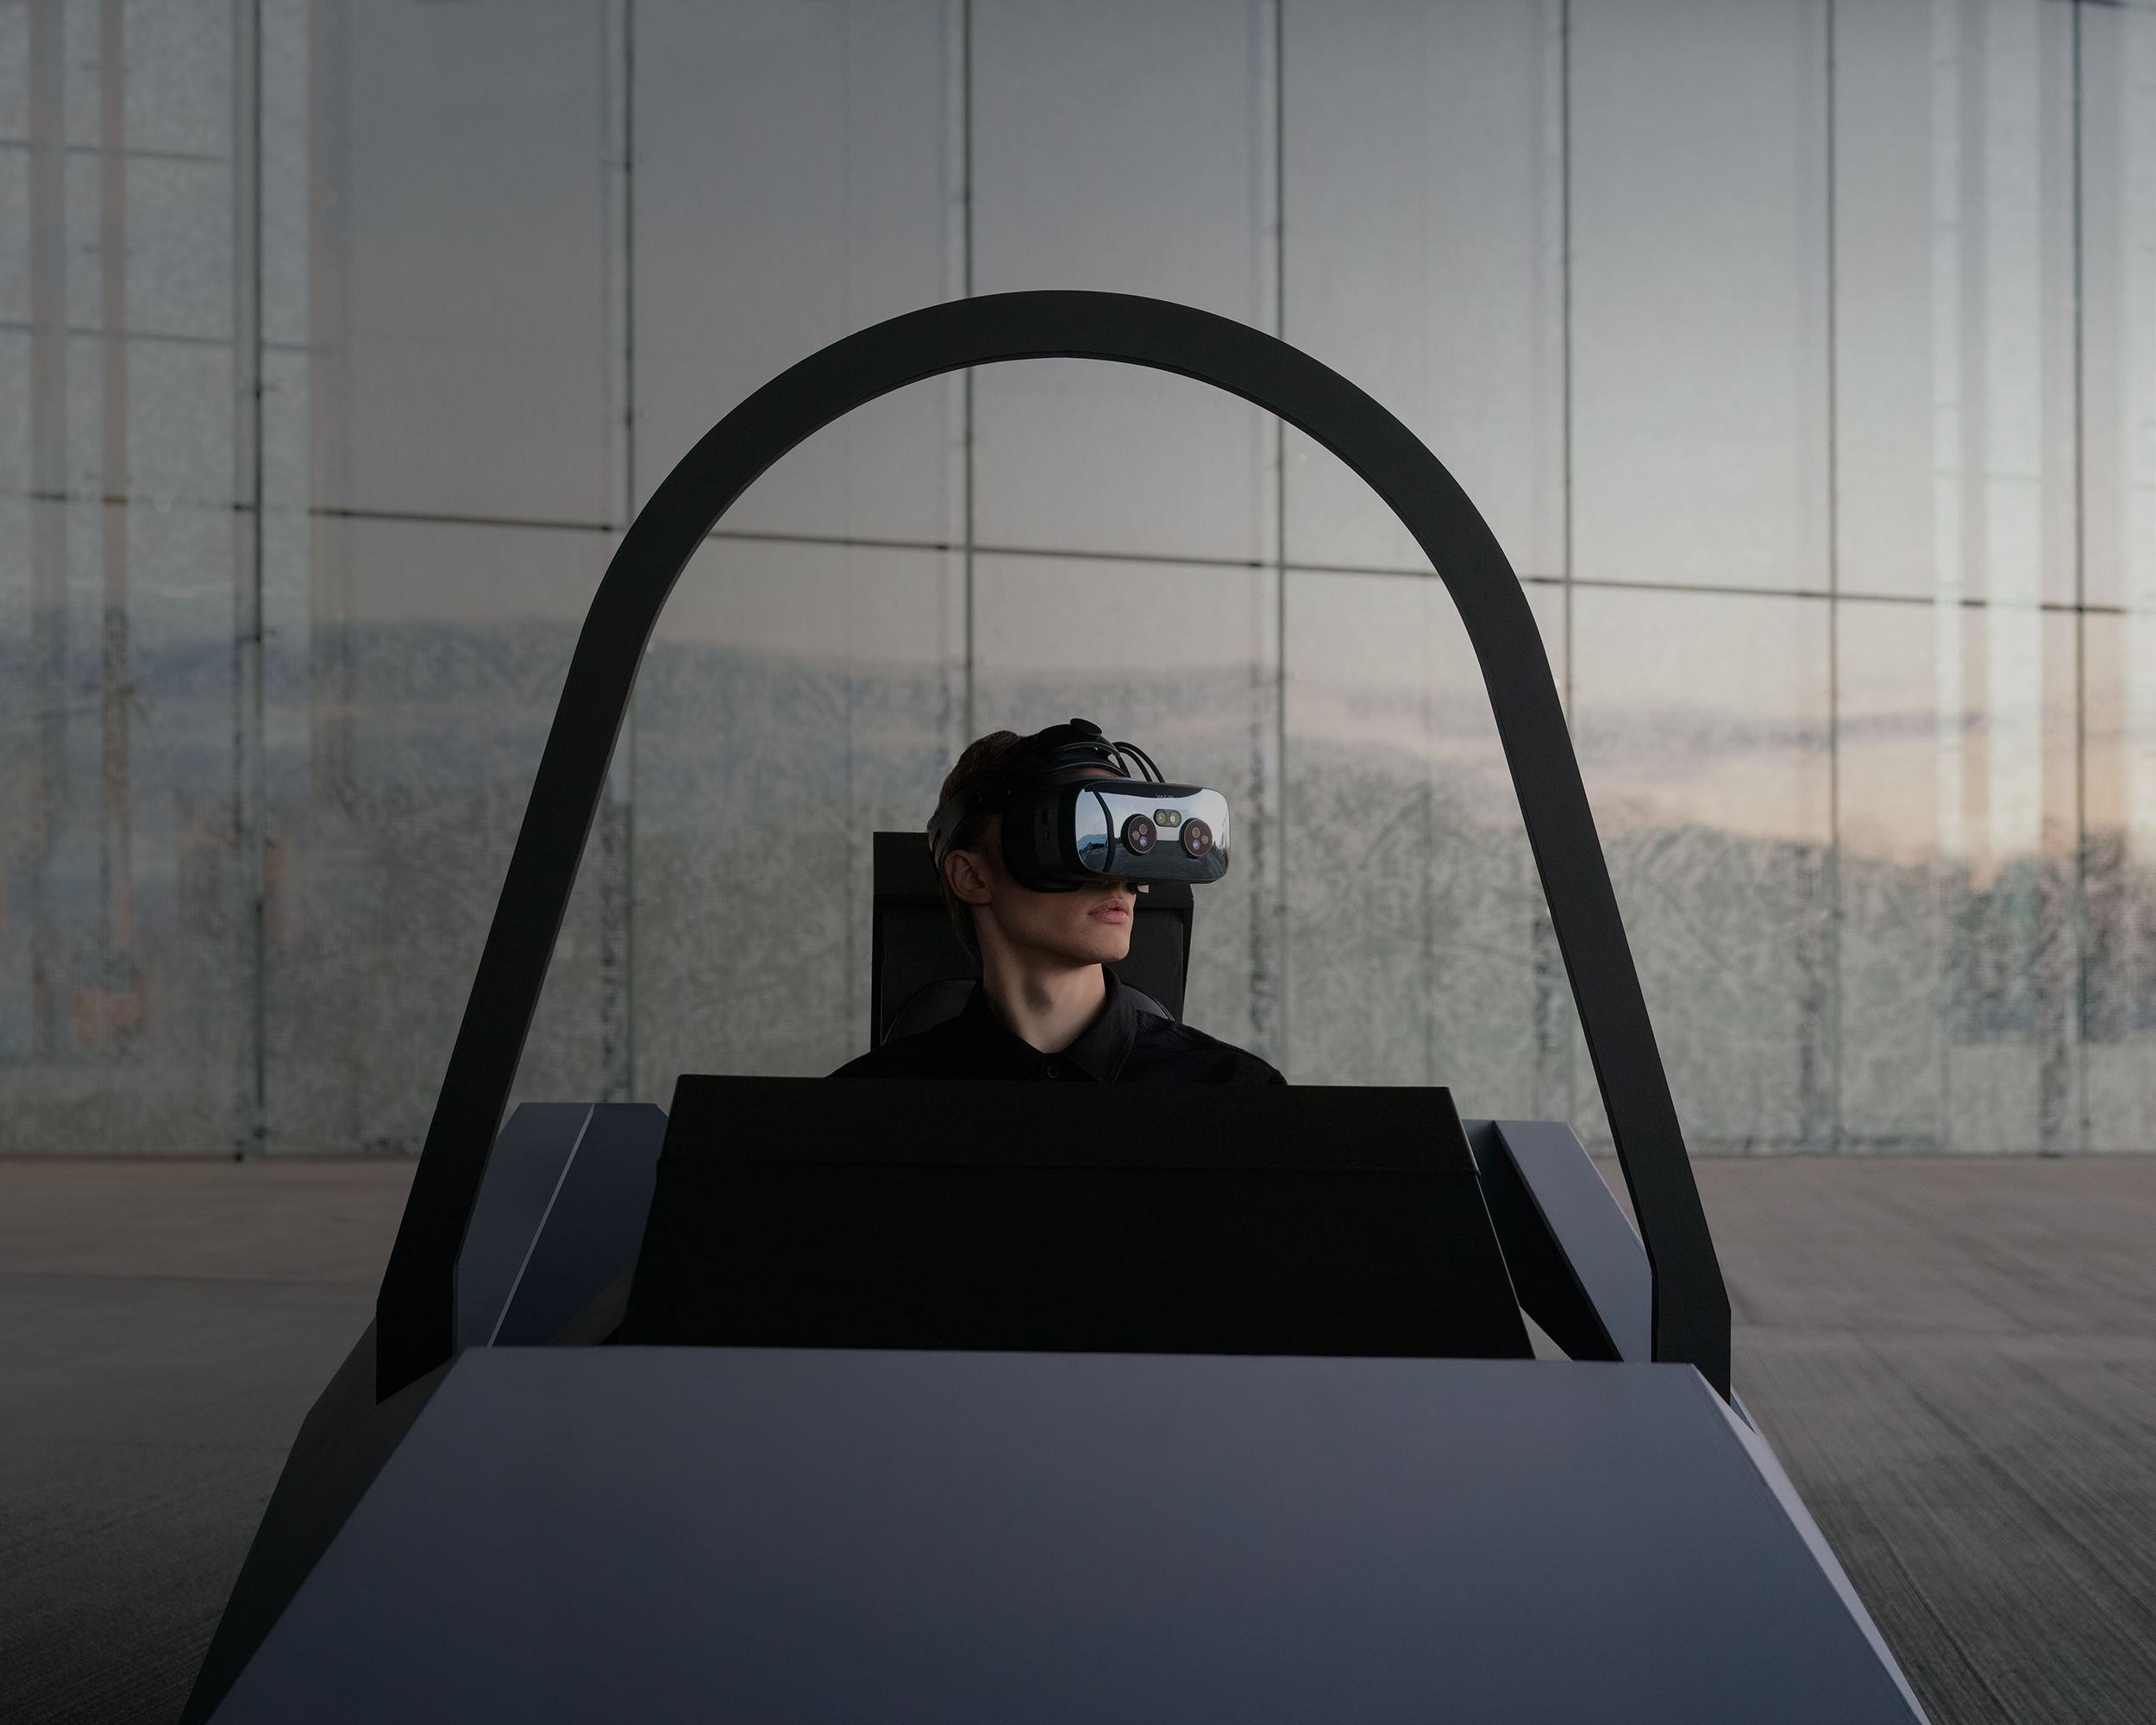 Varjo: Reduce the cost of training with immersive virtual reality (VR), augmented reality (AR) or mixed reality (MR/XR) environments to replace or supplement traditional training solutions.